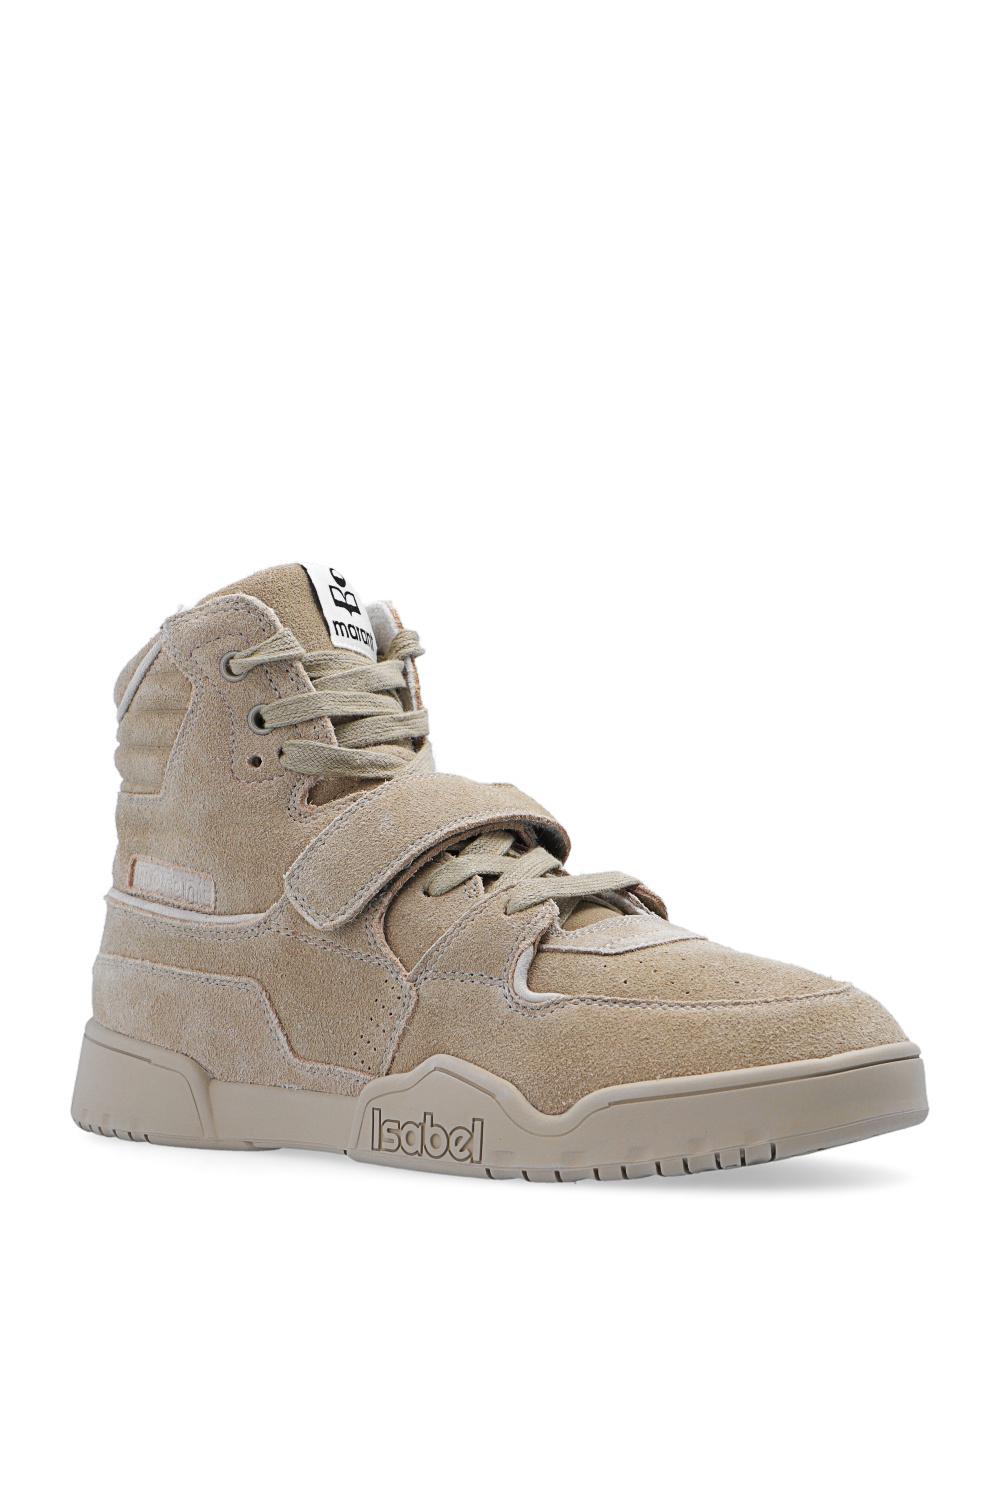 Isabel Marant 'alsee' High-top Sneakers in Natural | Lyst UK